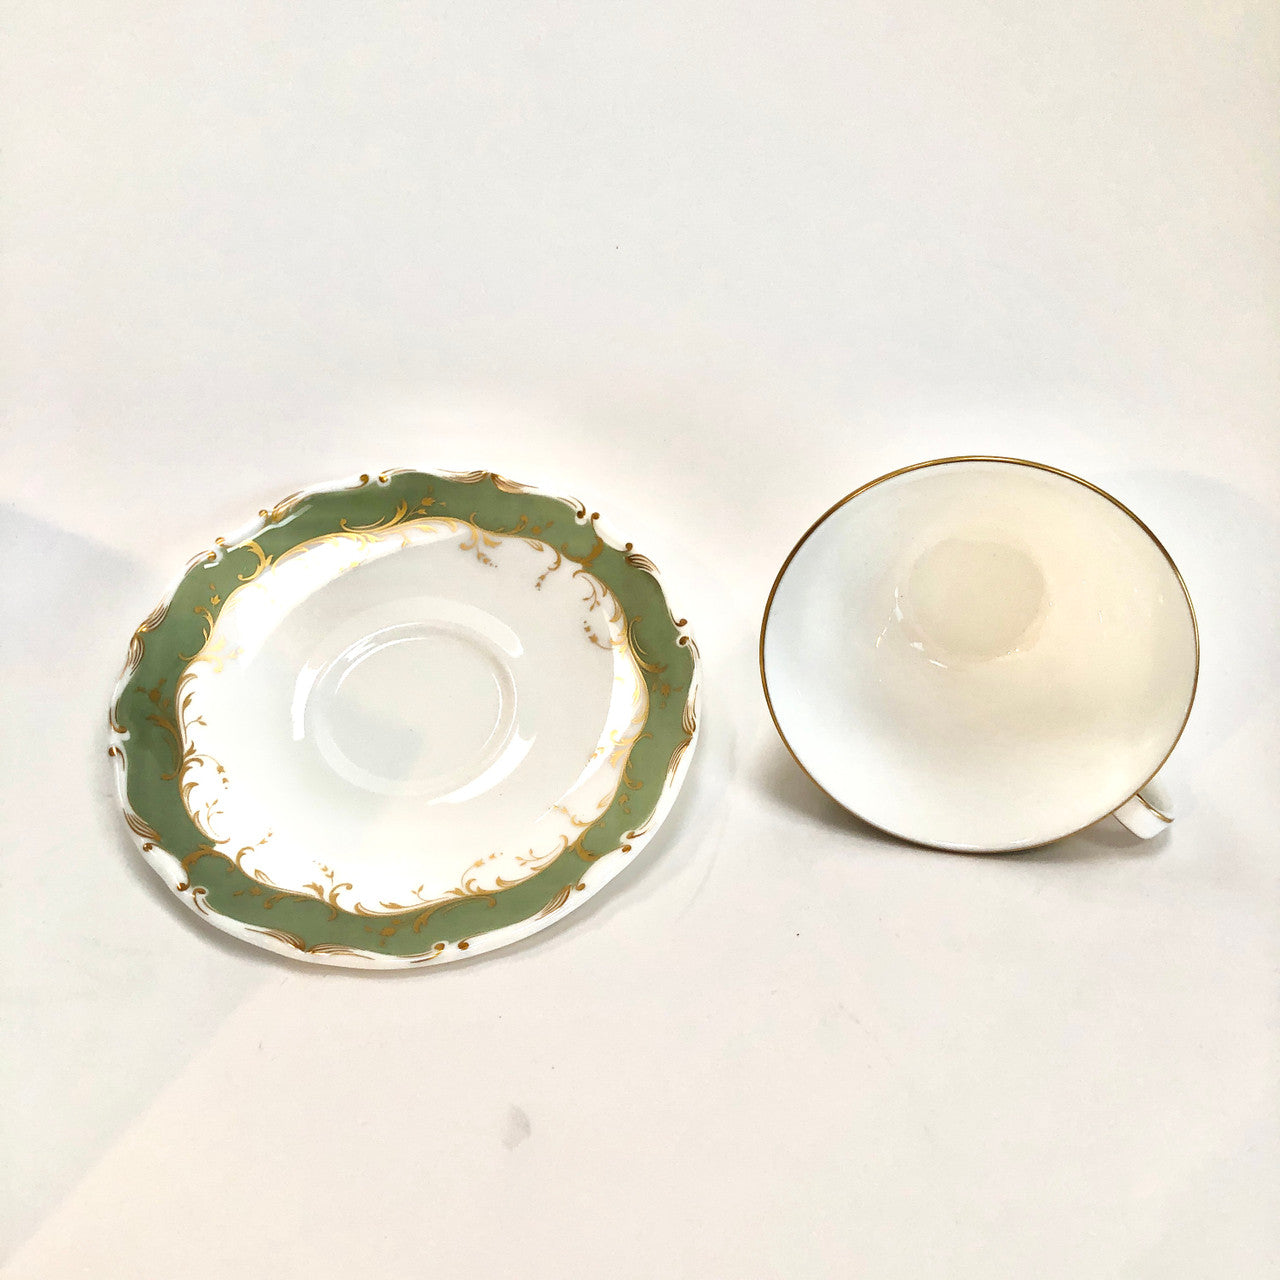 Royal Doulton, Fontainbleu, H 4987, Vintage, England, Green, Grey, Gold, Tea Cup, Cup, Saucer, Cup and Saucer, Fine, bone, China, Steampunk